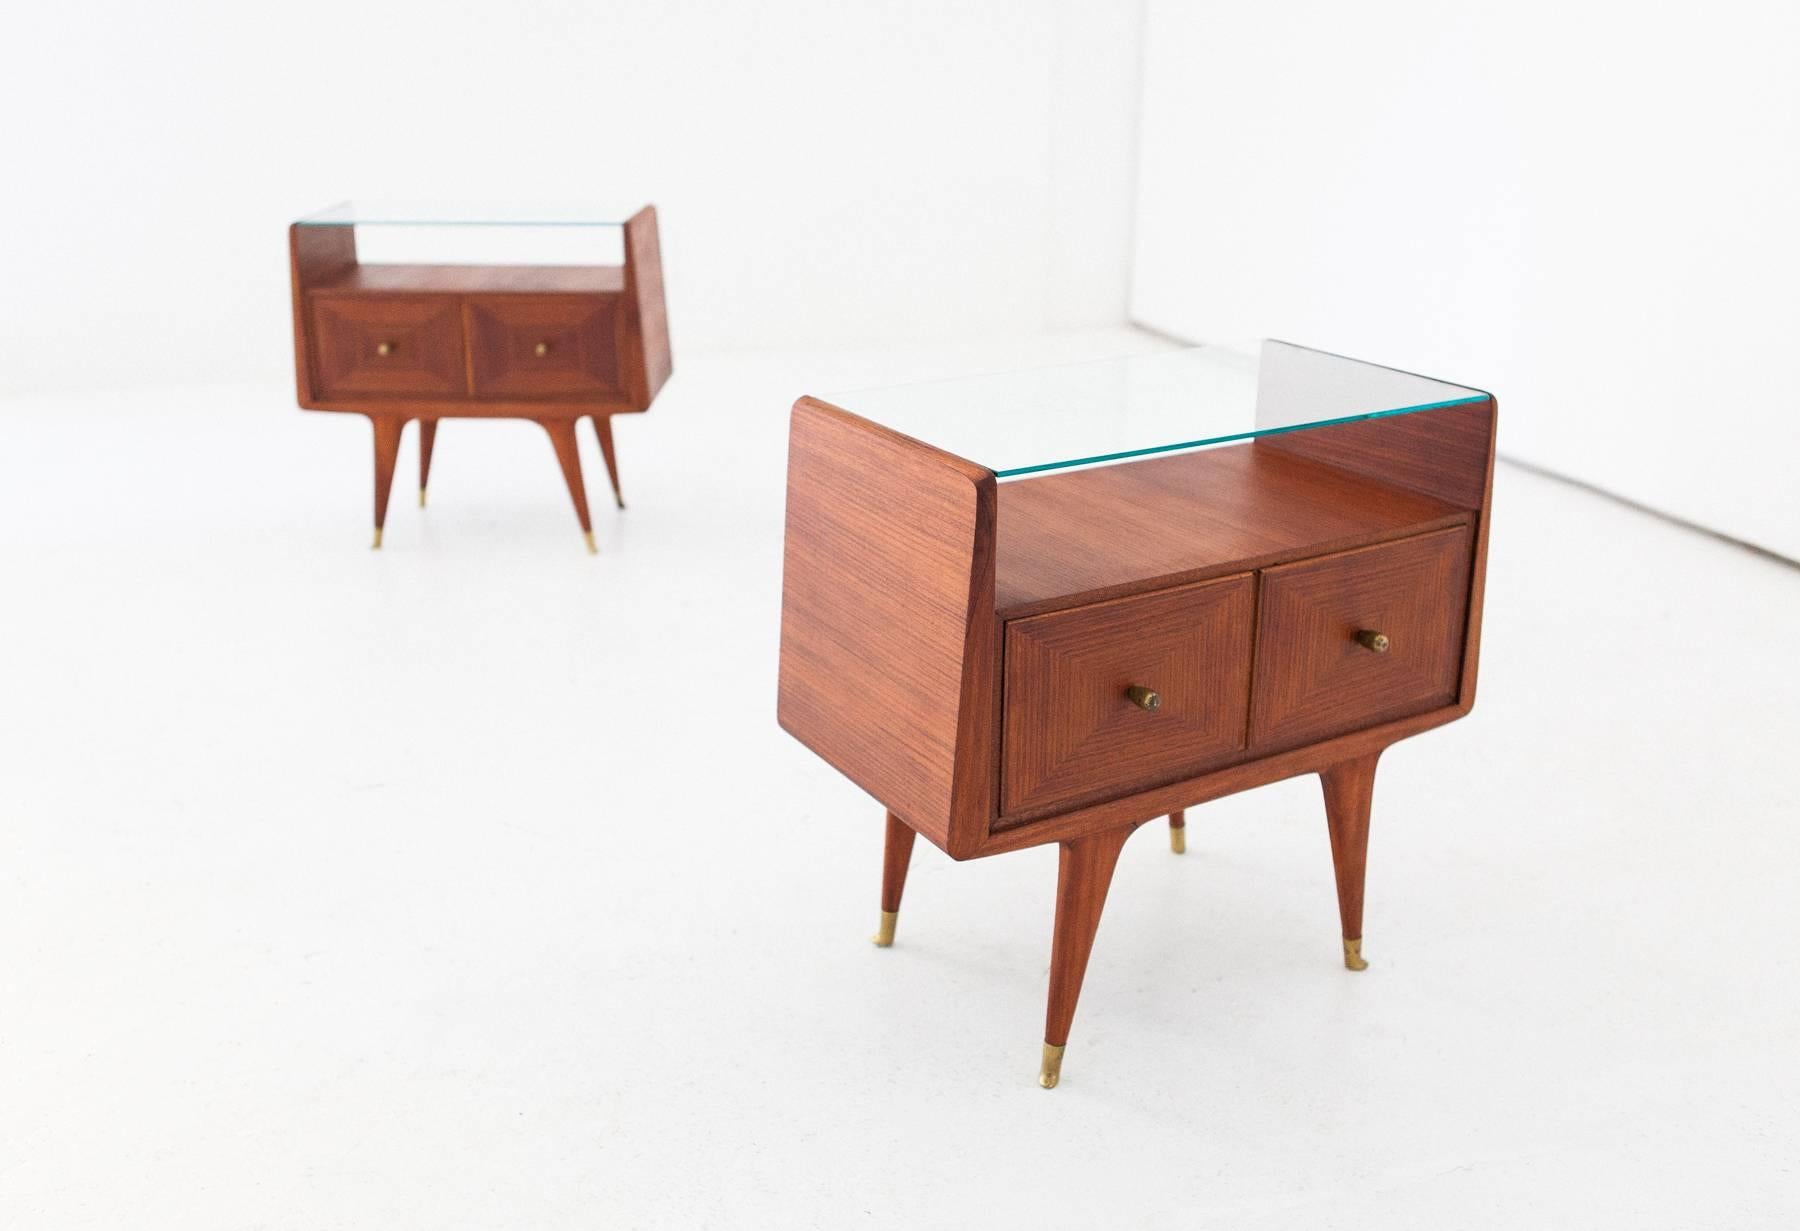 Mid-20th Century Italian Mid-Century Modern Brass and Mahogany Bedside Tables Nightstands, 1950s